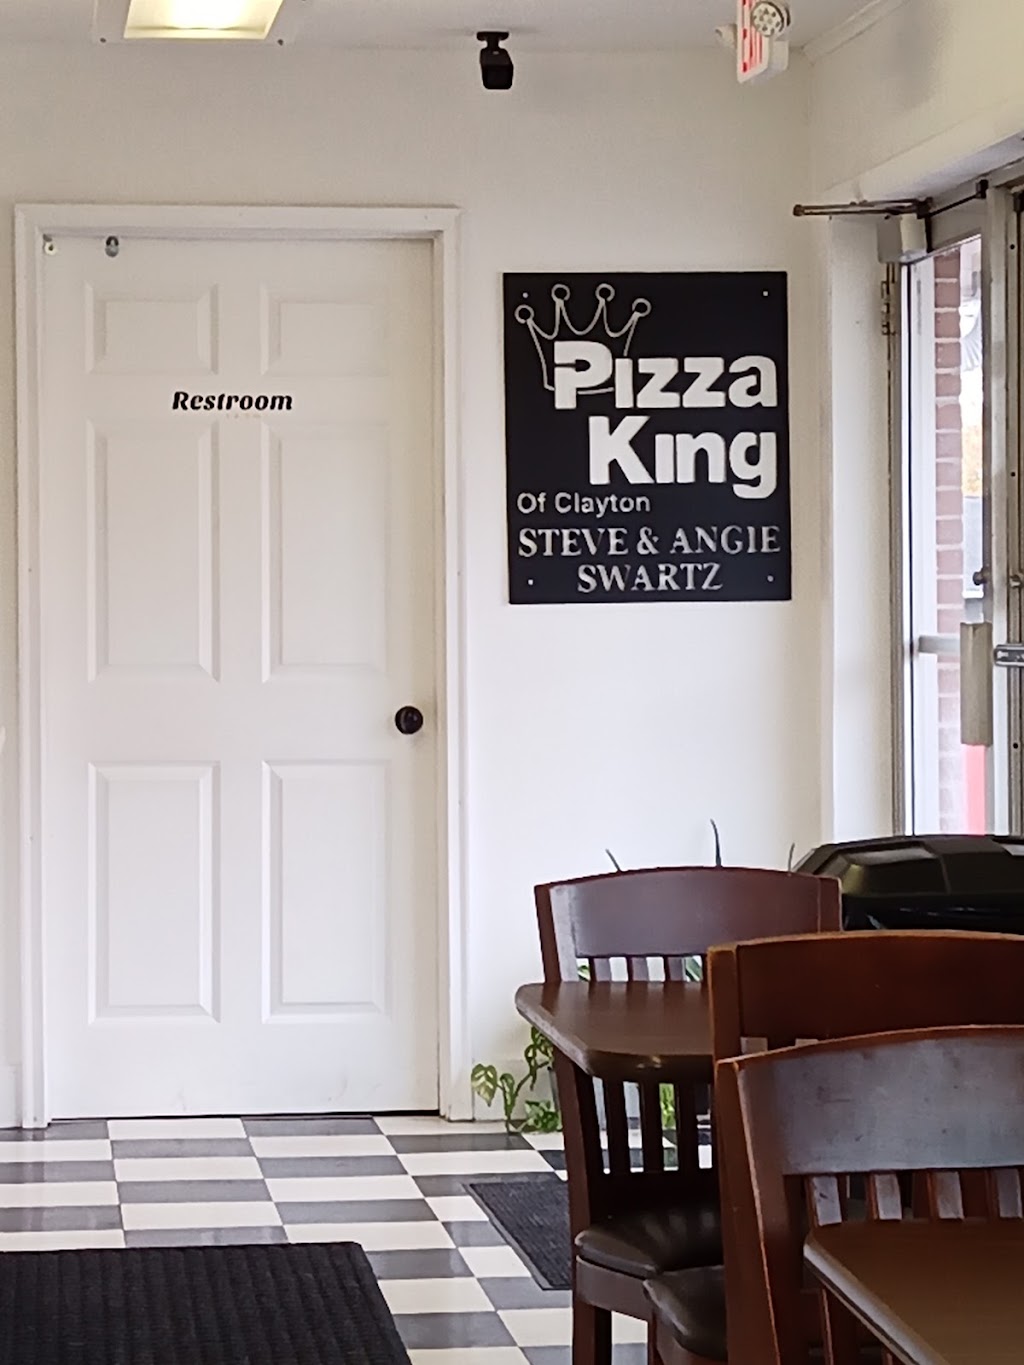 Pizza King of Clayton Indiana | 48 Kentucky St, Clayton, IN 46118 | Phone: (317) 539-7720